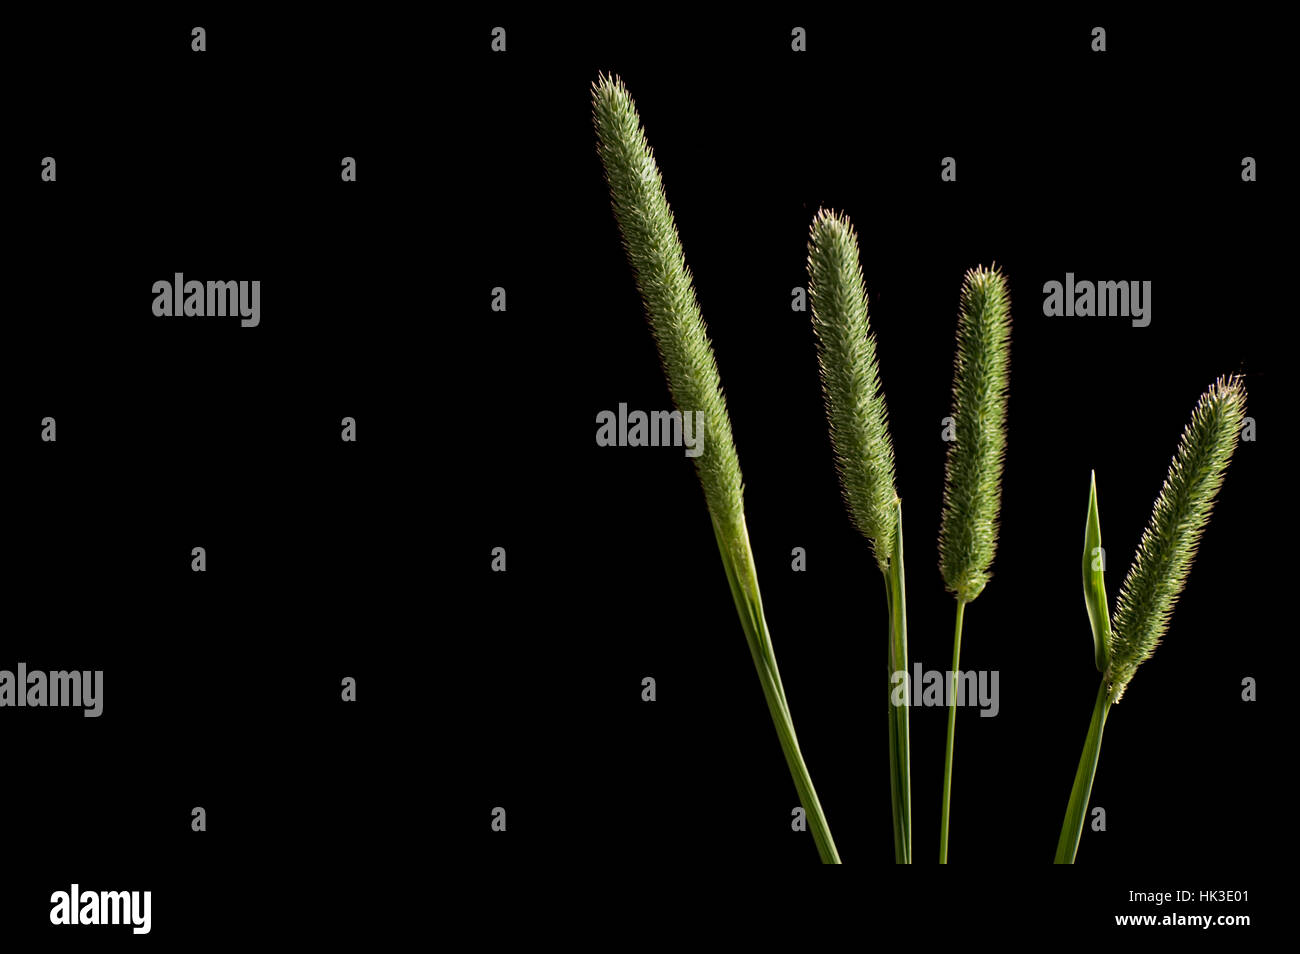 Slender meadow foxtail green tall grass against black background closeup Stock Photo